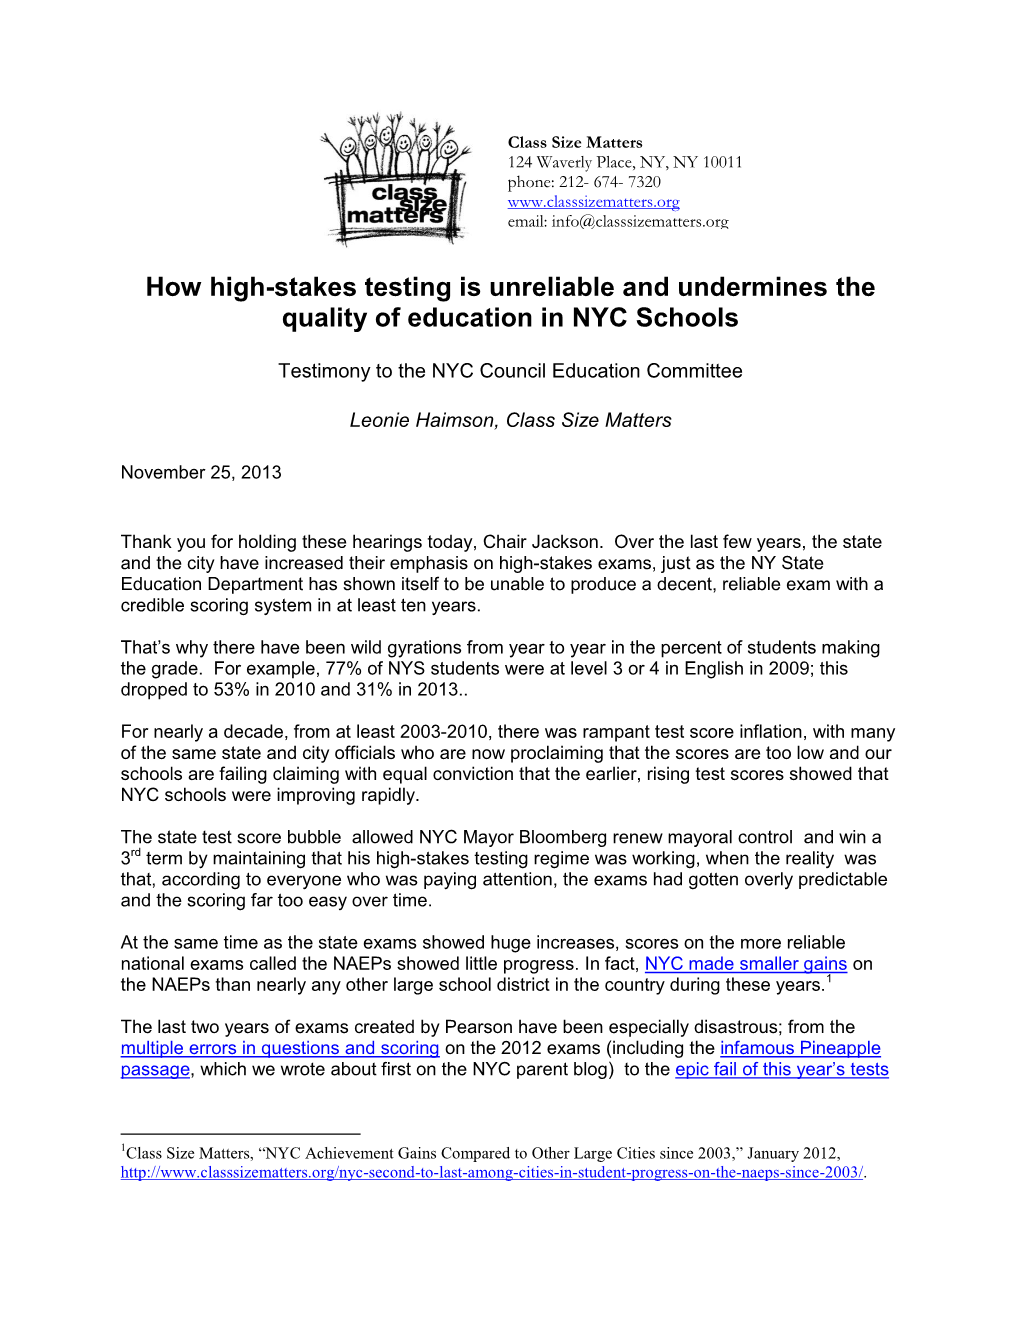 How High-Stakes Testing Is Unreliable and Undermines the Quality of Education in NYC Schools